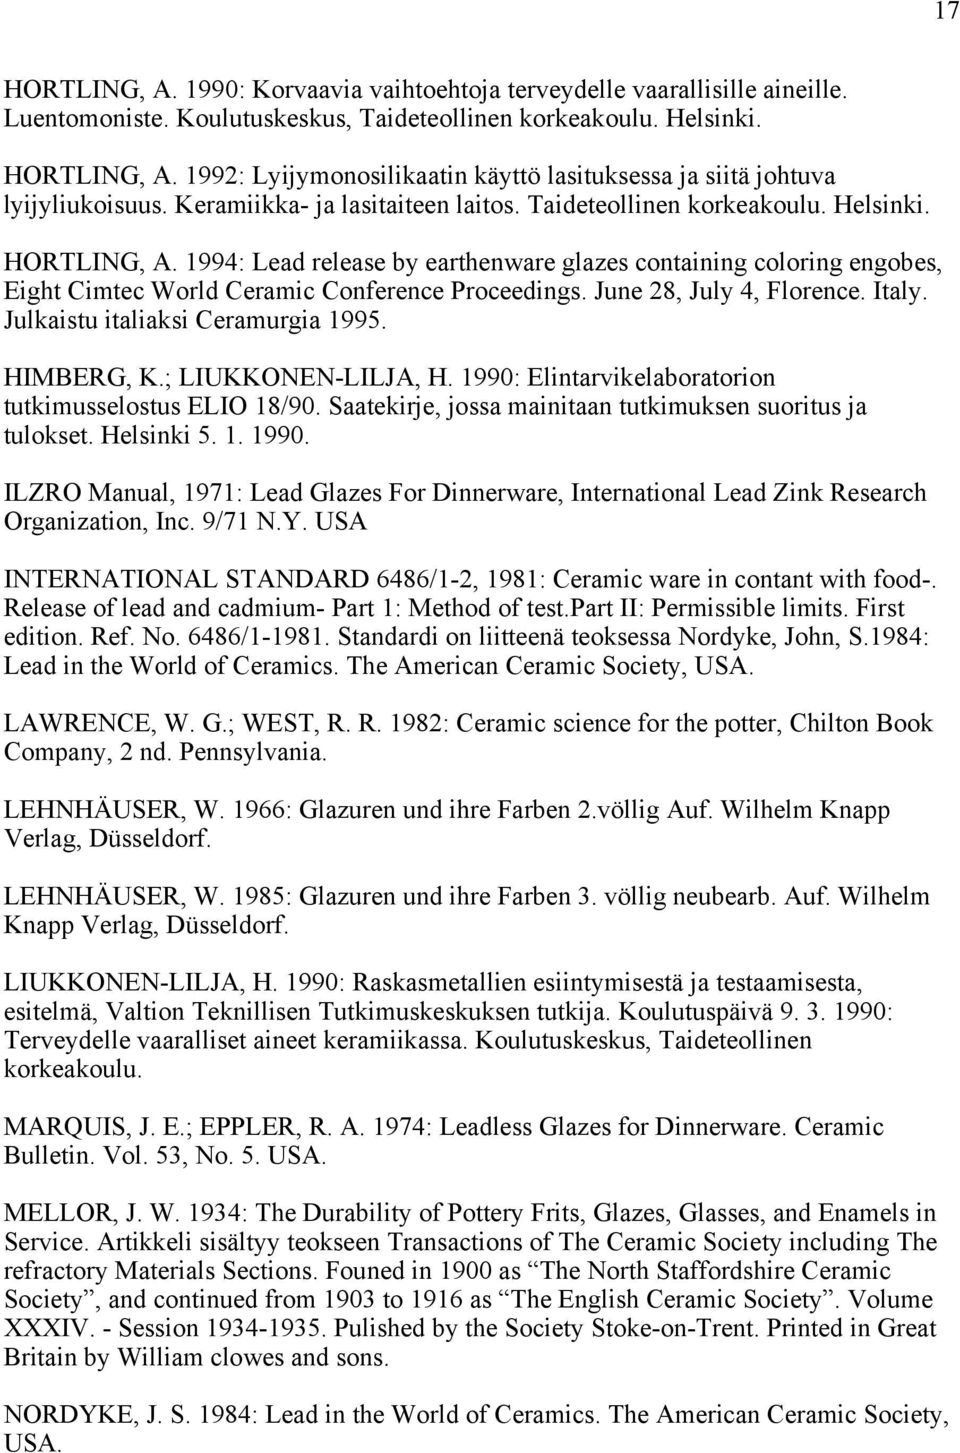 1994: Lead release by earthenware glazes containing coloring engobes, Eight Cimtec World Ceramic Conference Proceedings. June 28, July 4, Florence. Italy. Julkaistu italiaksi Ceramurgia 1995.